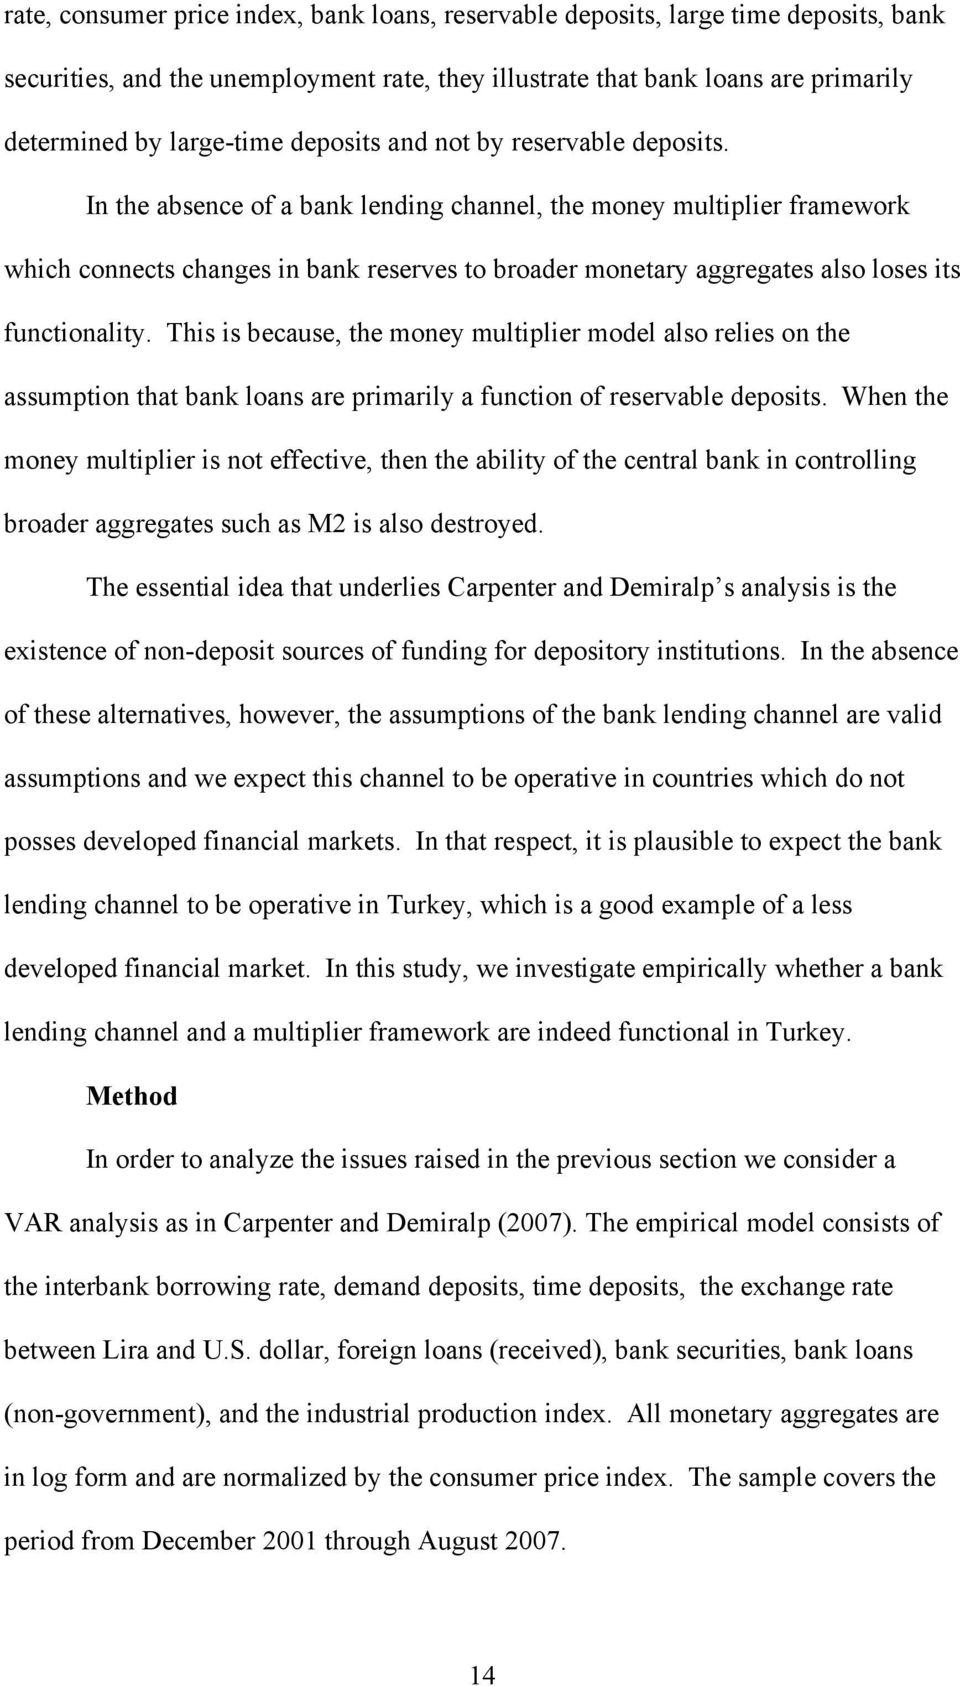 In the absence of a bank lending channel, the money multiplier framework which connects changes in bank reserves to broader monetary aggregates also loses its functionality.